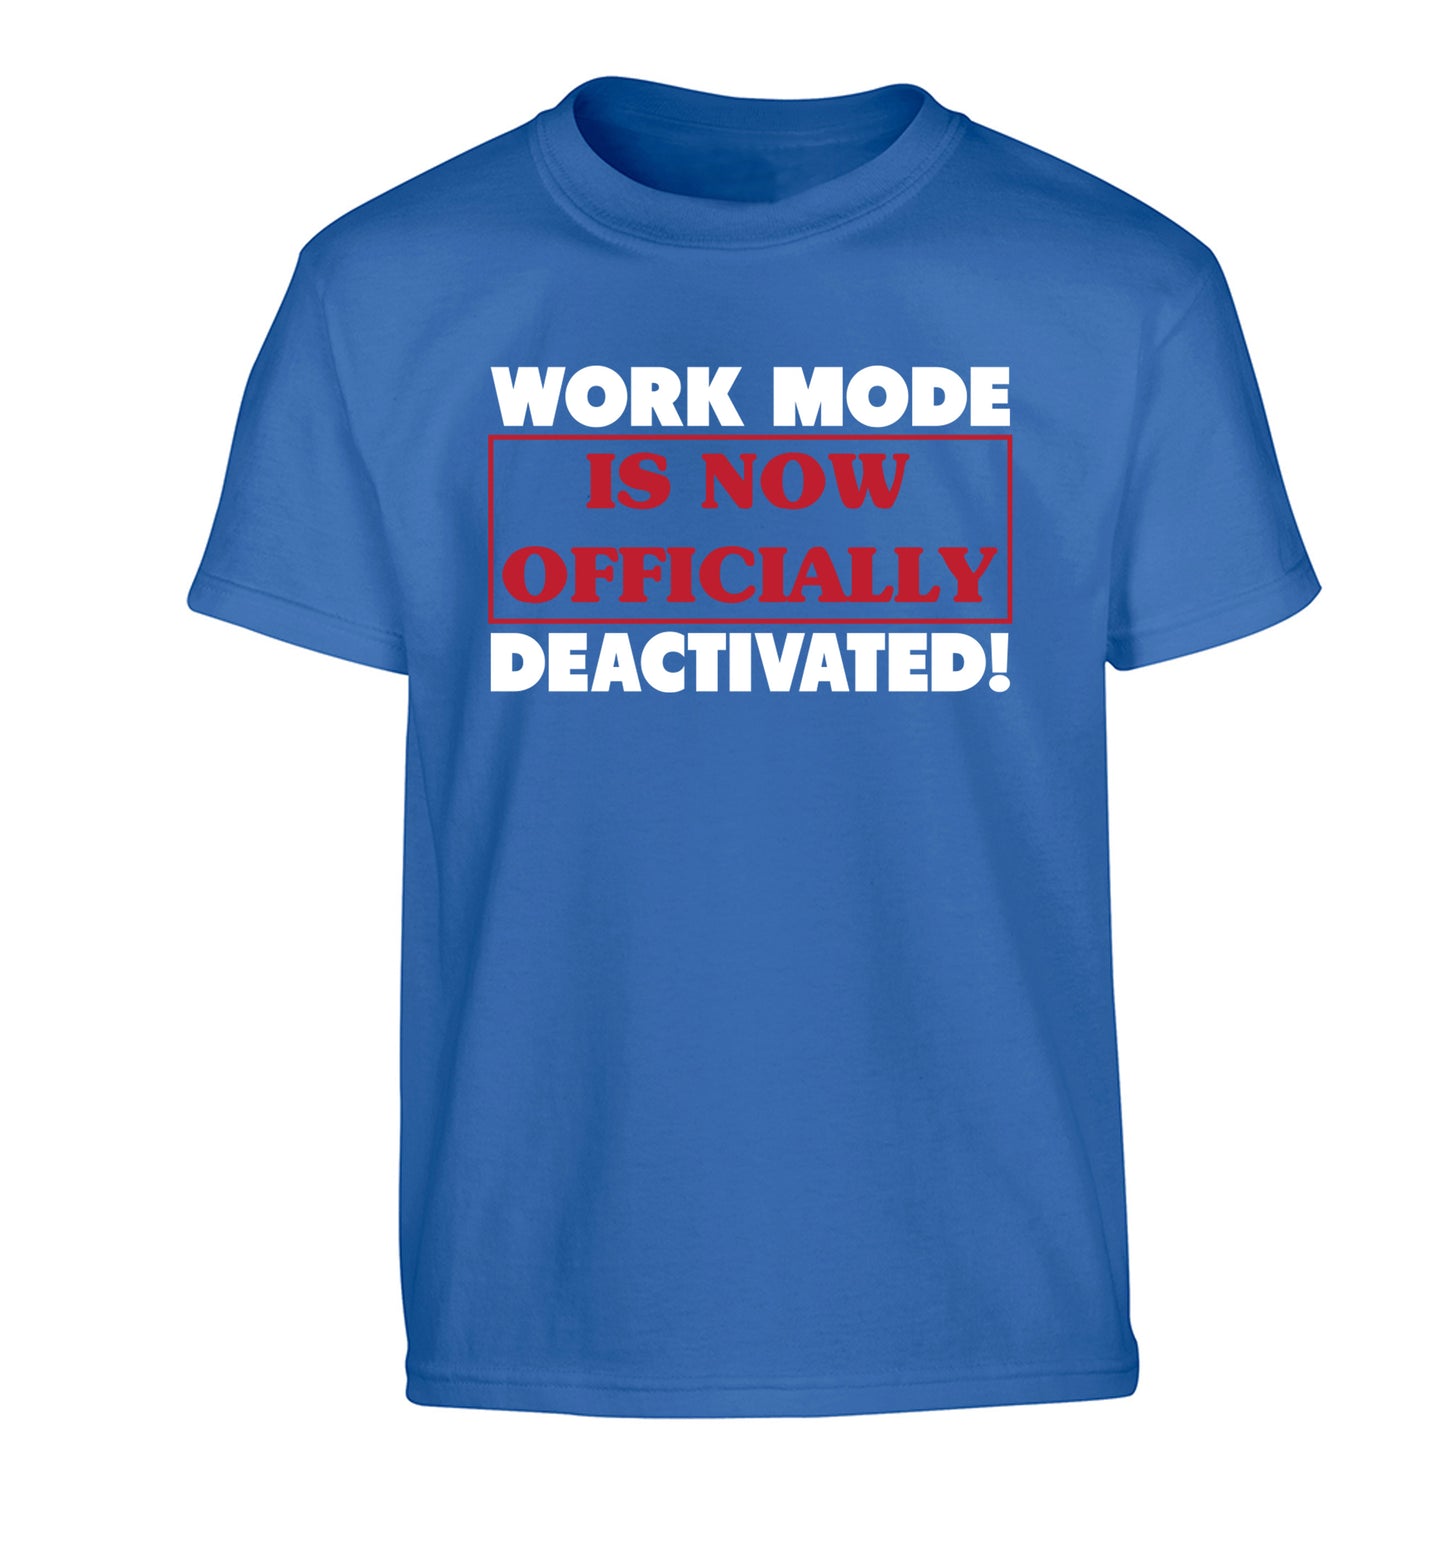 Work mode is now officially deactivated Children's blue Tshirt 12-13 Years